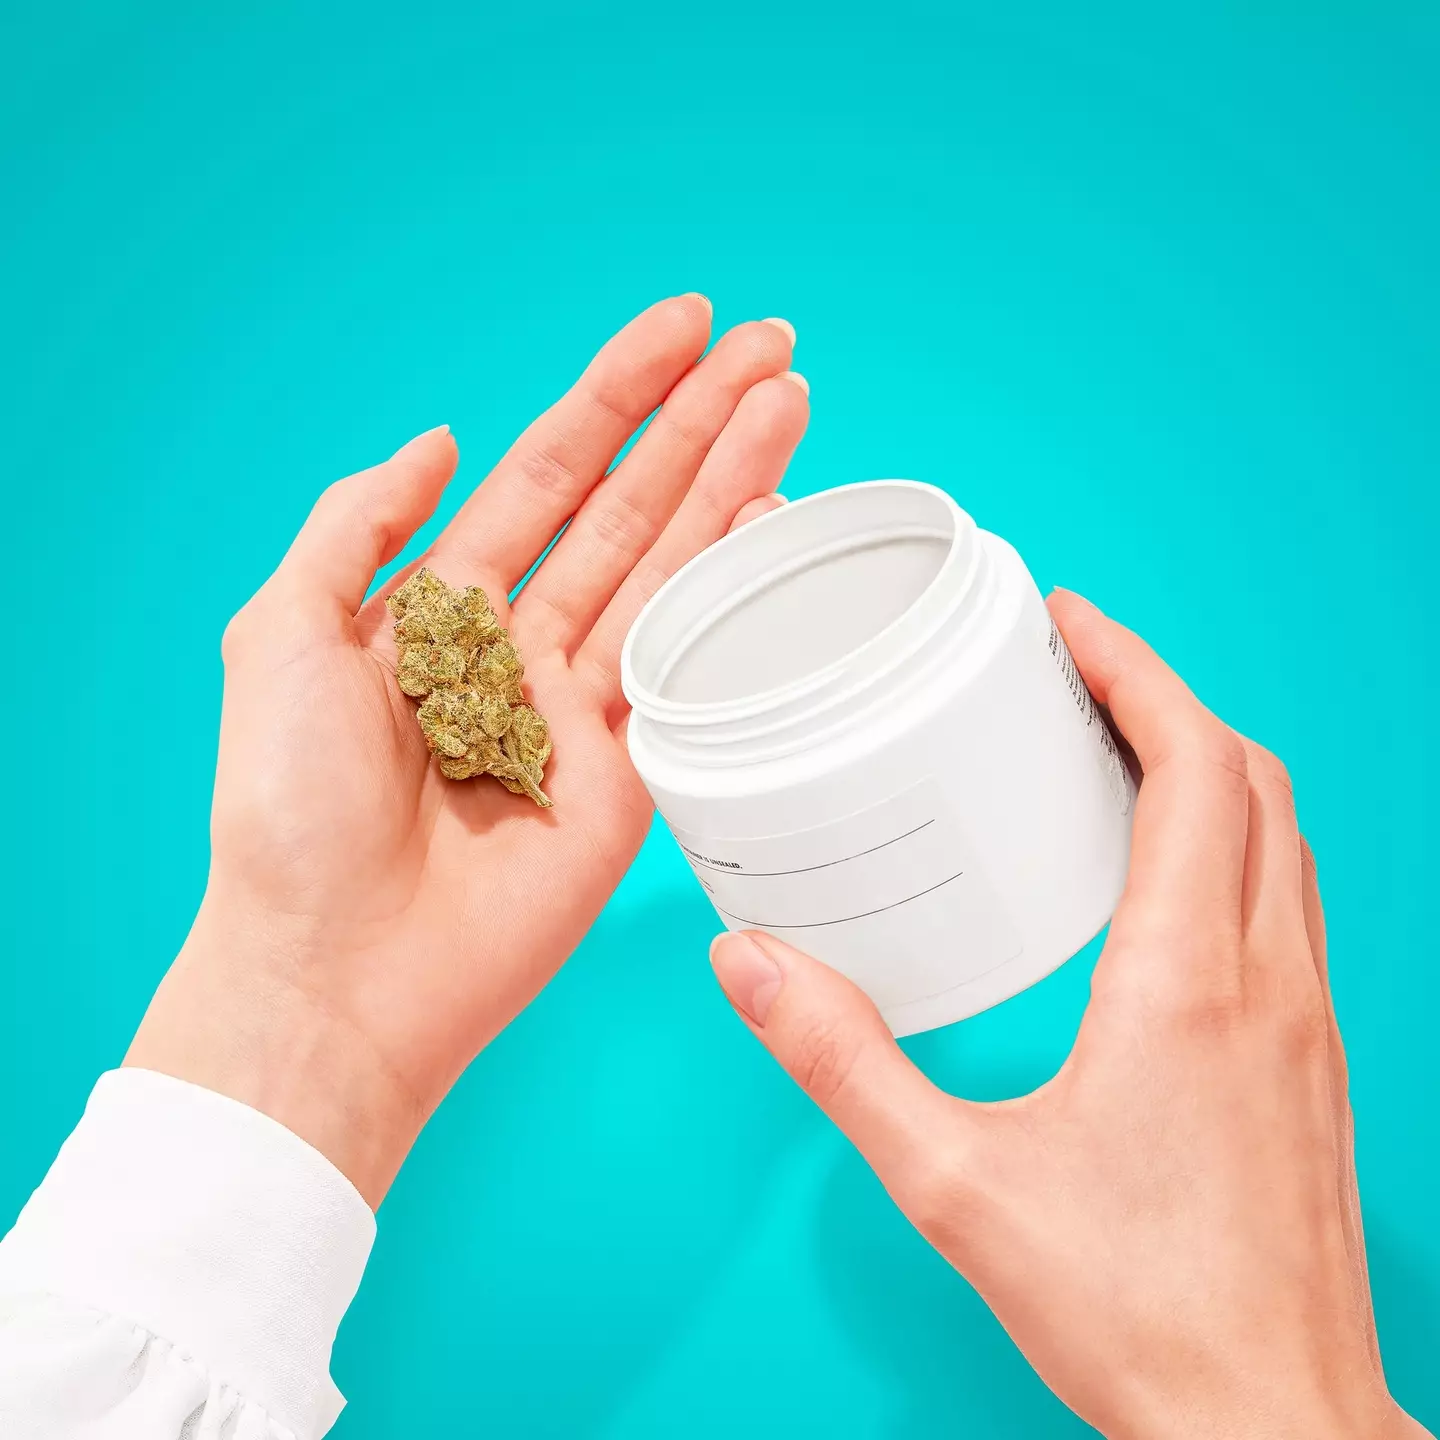 A UK-based medical clinic delivers cannabis straight to your door in a bid to 'offer an alternative to conventional medicines'.